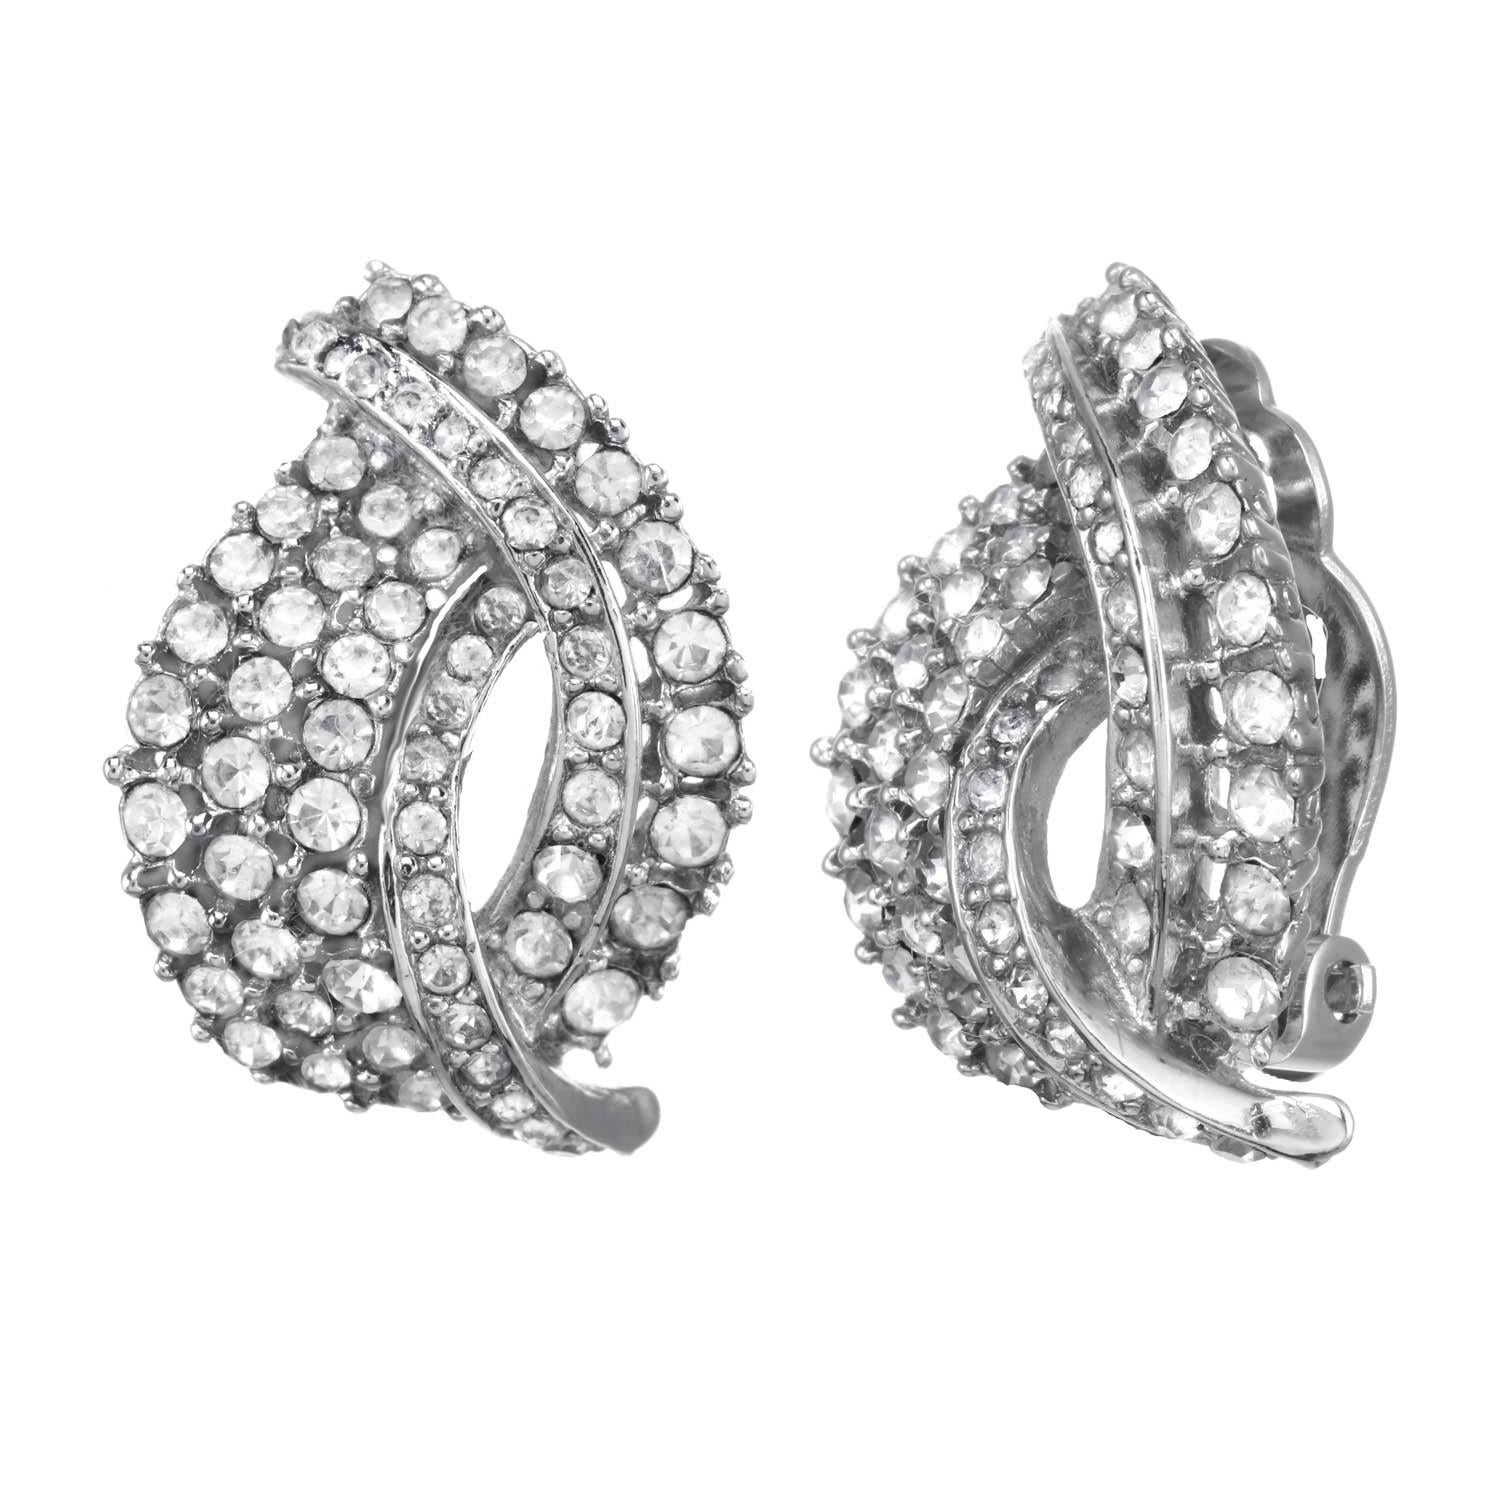 A vintage inspired piece, adorned with illuminating crystal rhinestones accents, these earrings are the perfect accessory to bring you from day to night! 

Materials
Pewter
Genuine Rhodium Plating
Clip Backing 